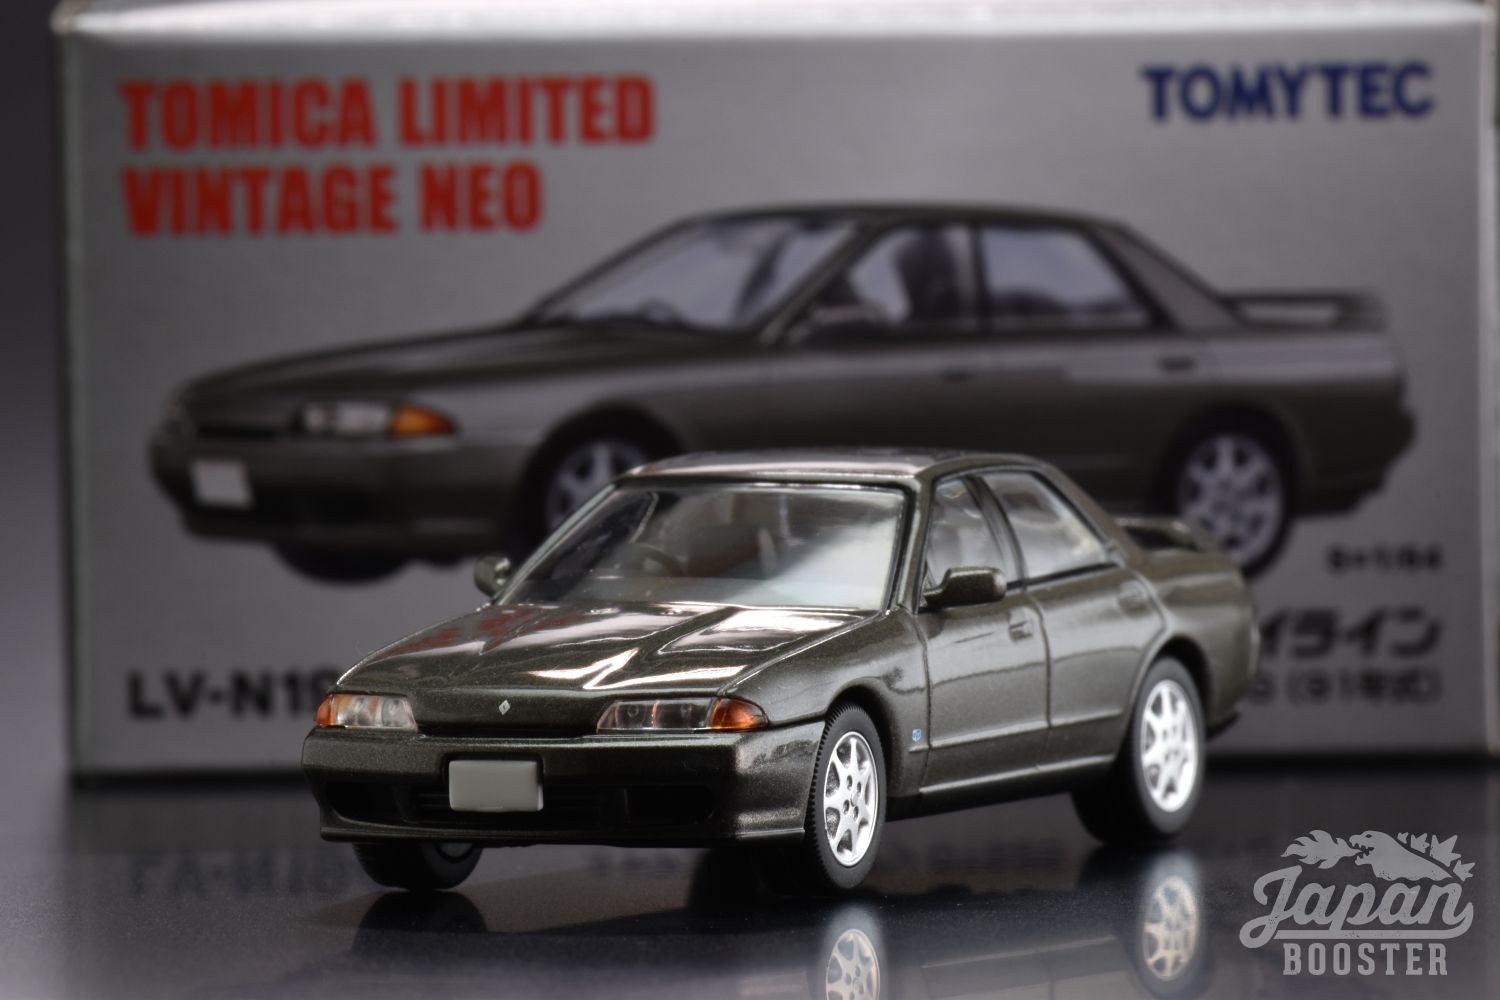 TOMICA LIMITED VINTAGE NEO LV-N234A 1/64 NISSAN CALSONIC SKYLINE GT-R 1991 NEW 